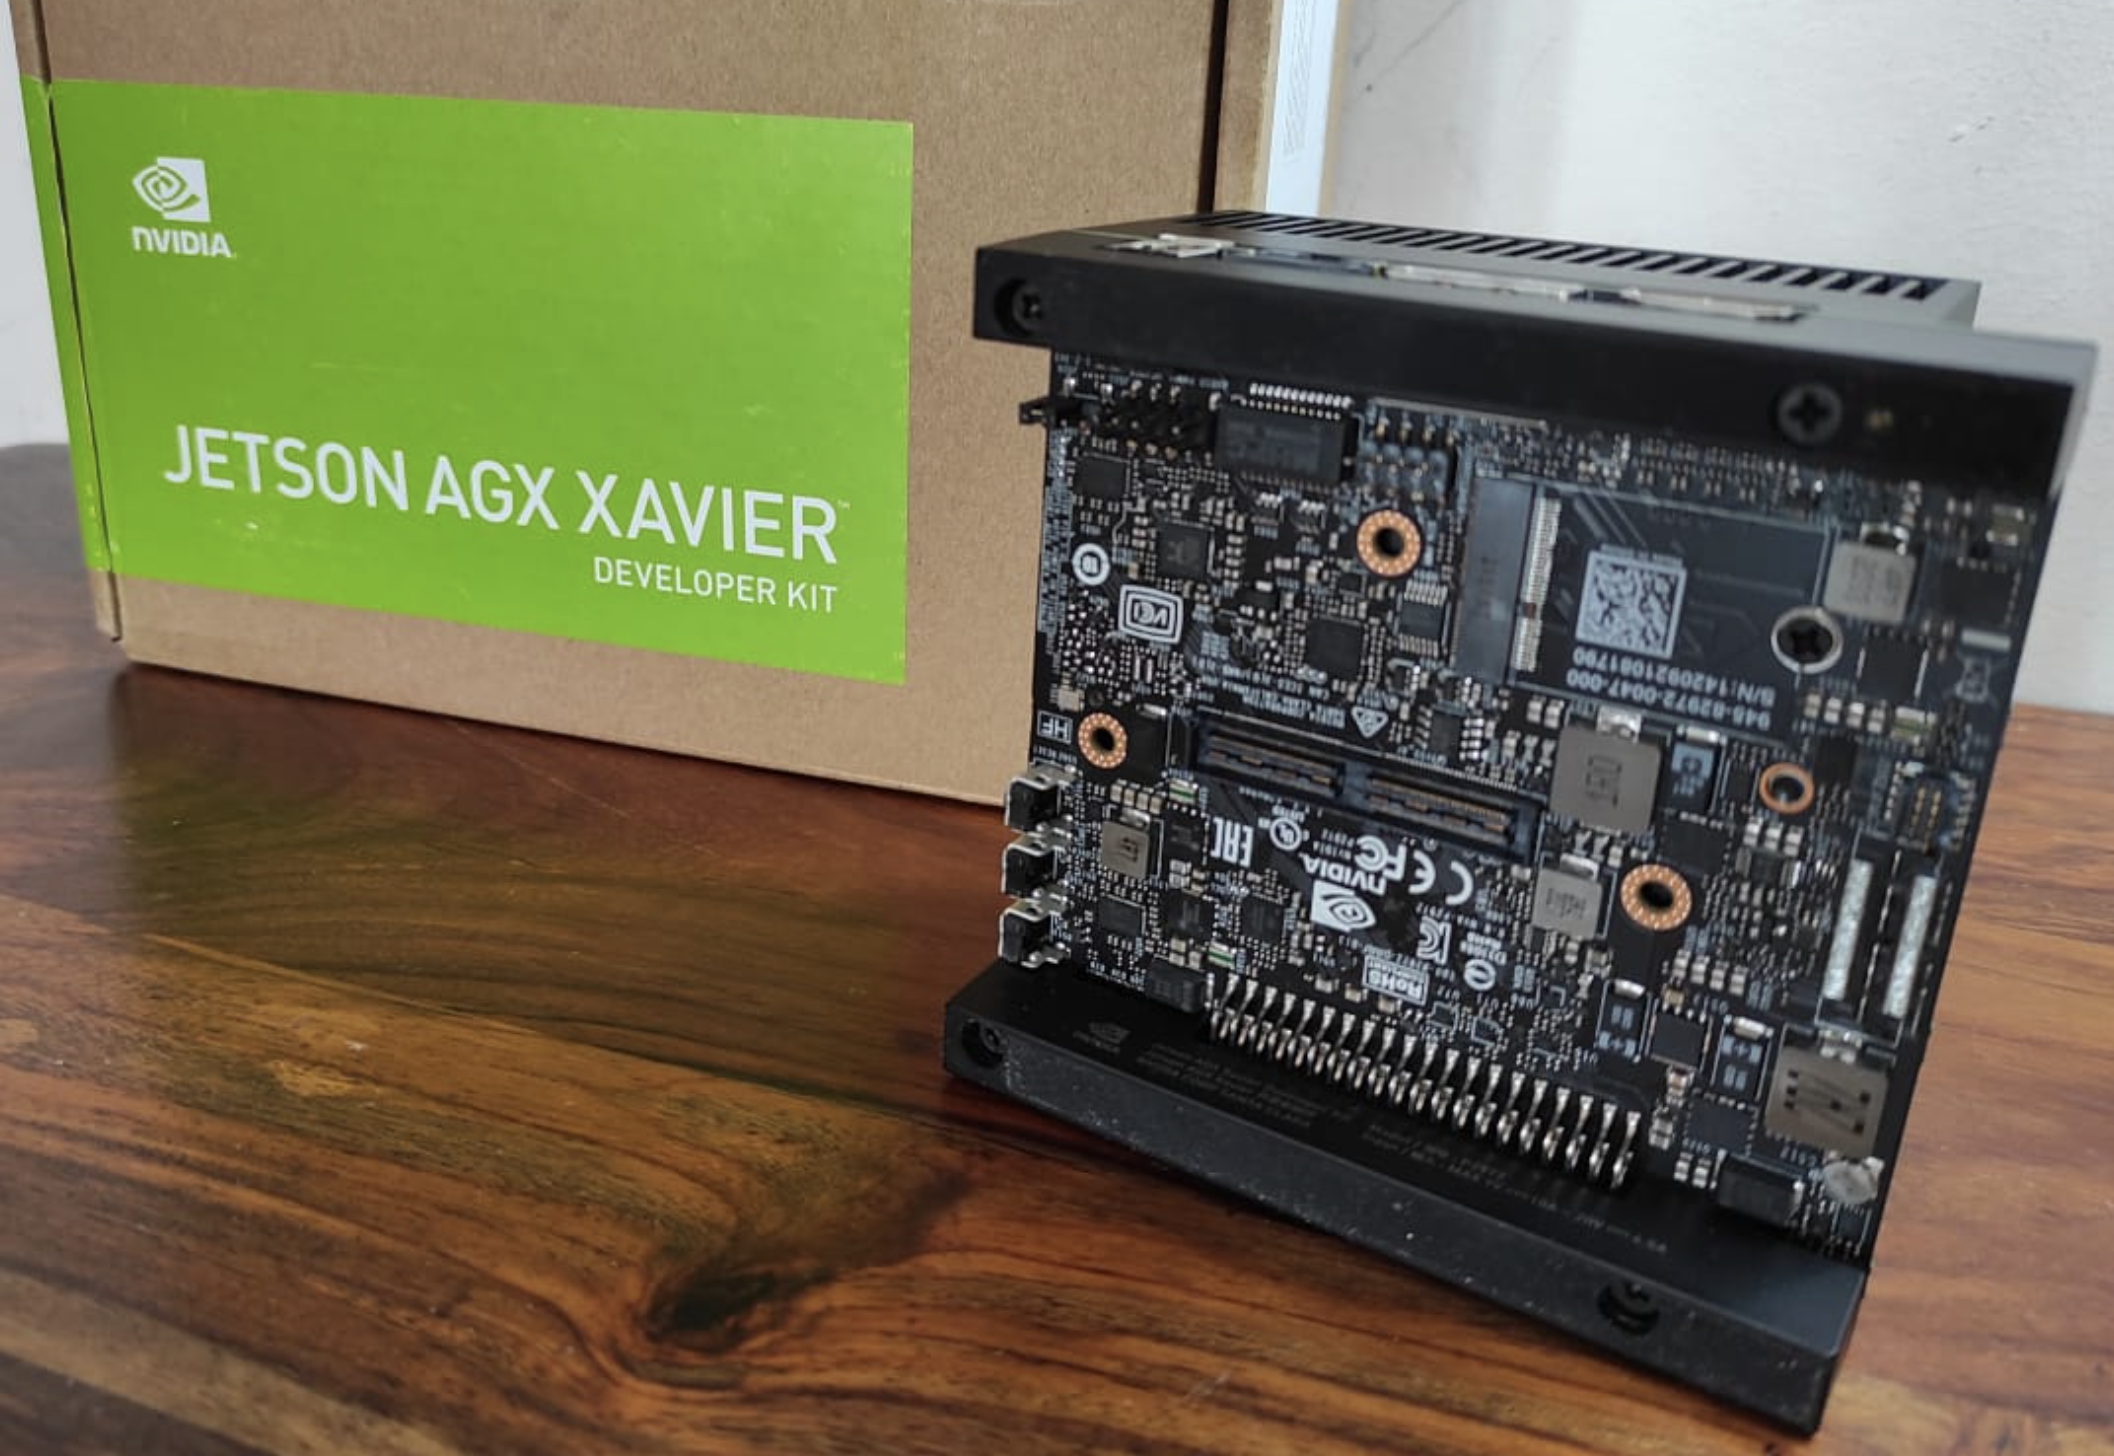 Getting Started with Docker and AI workloads on NVIDIA Jetson AGX Xavier Developer Platform